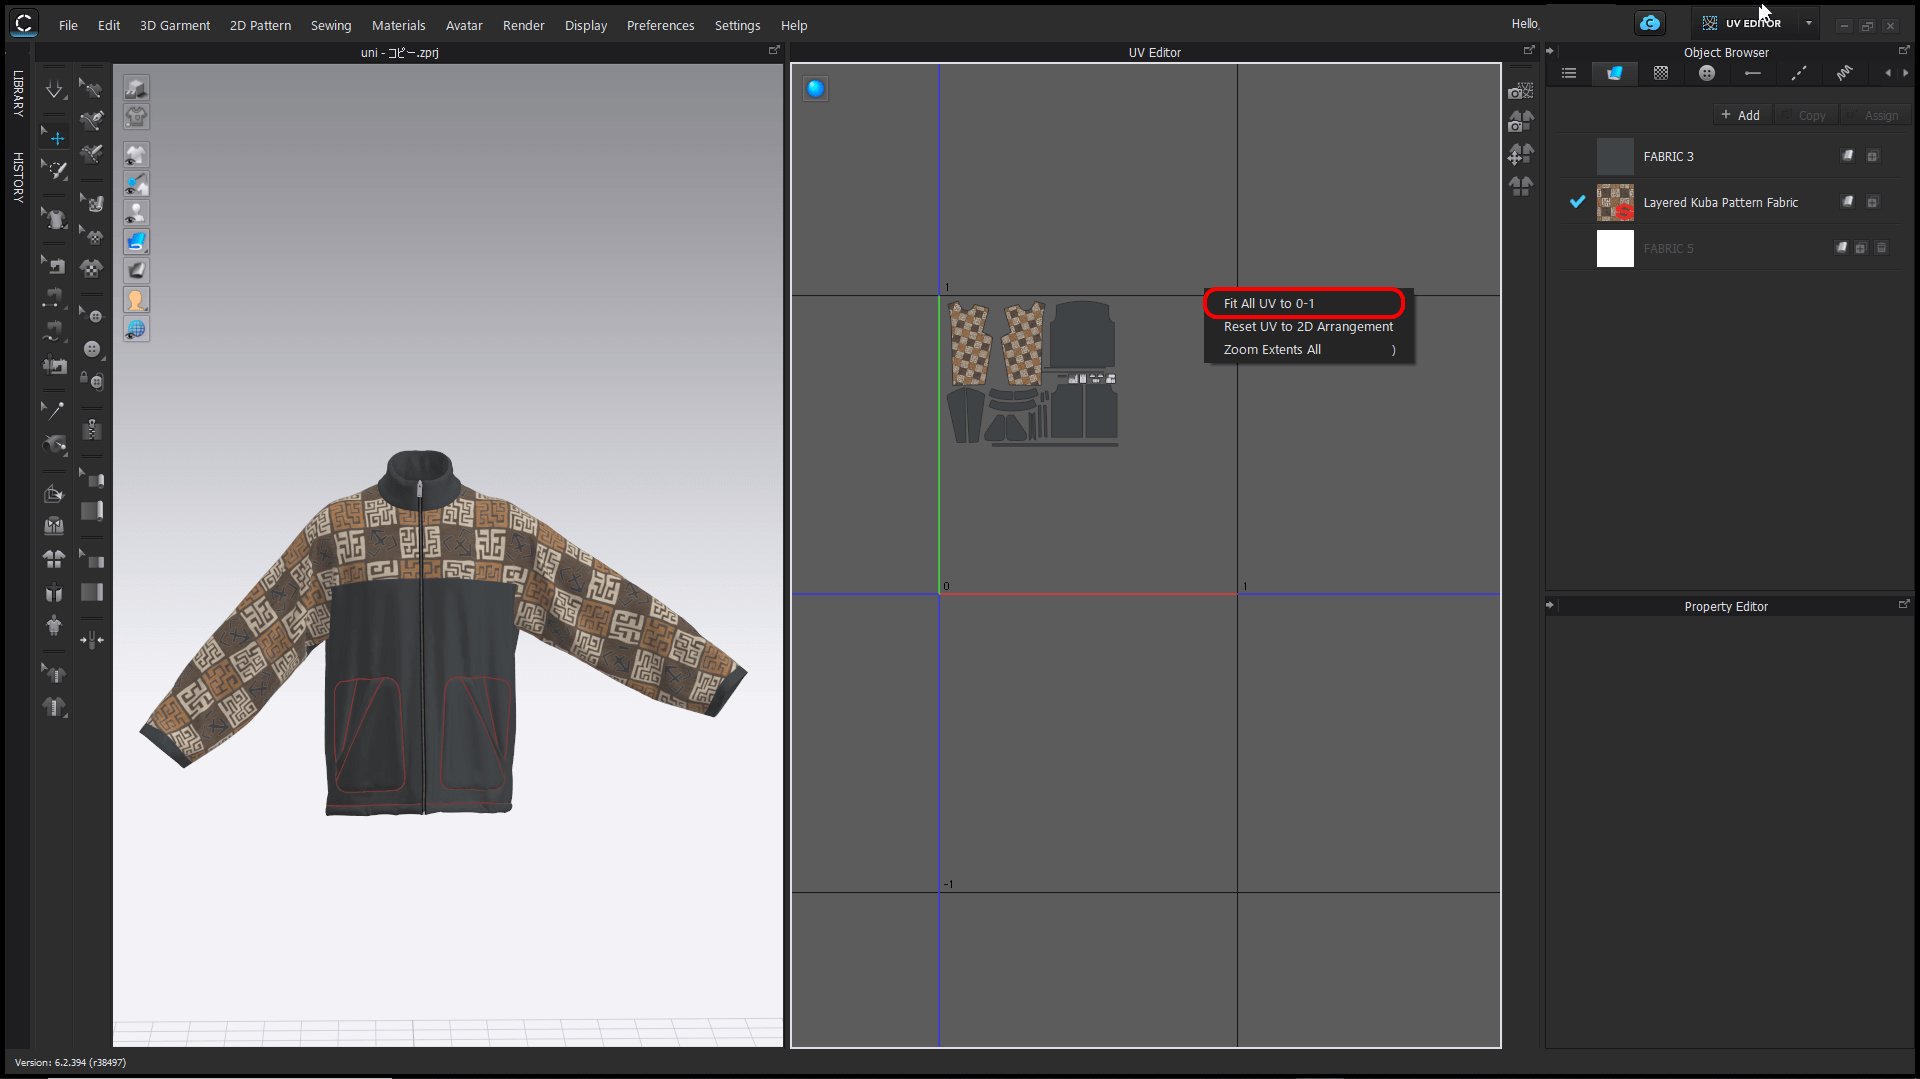 Place the 2D pattern on the rectangle and click on "Reposition all UVs to 0-1